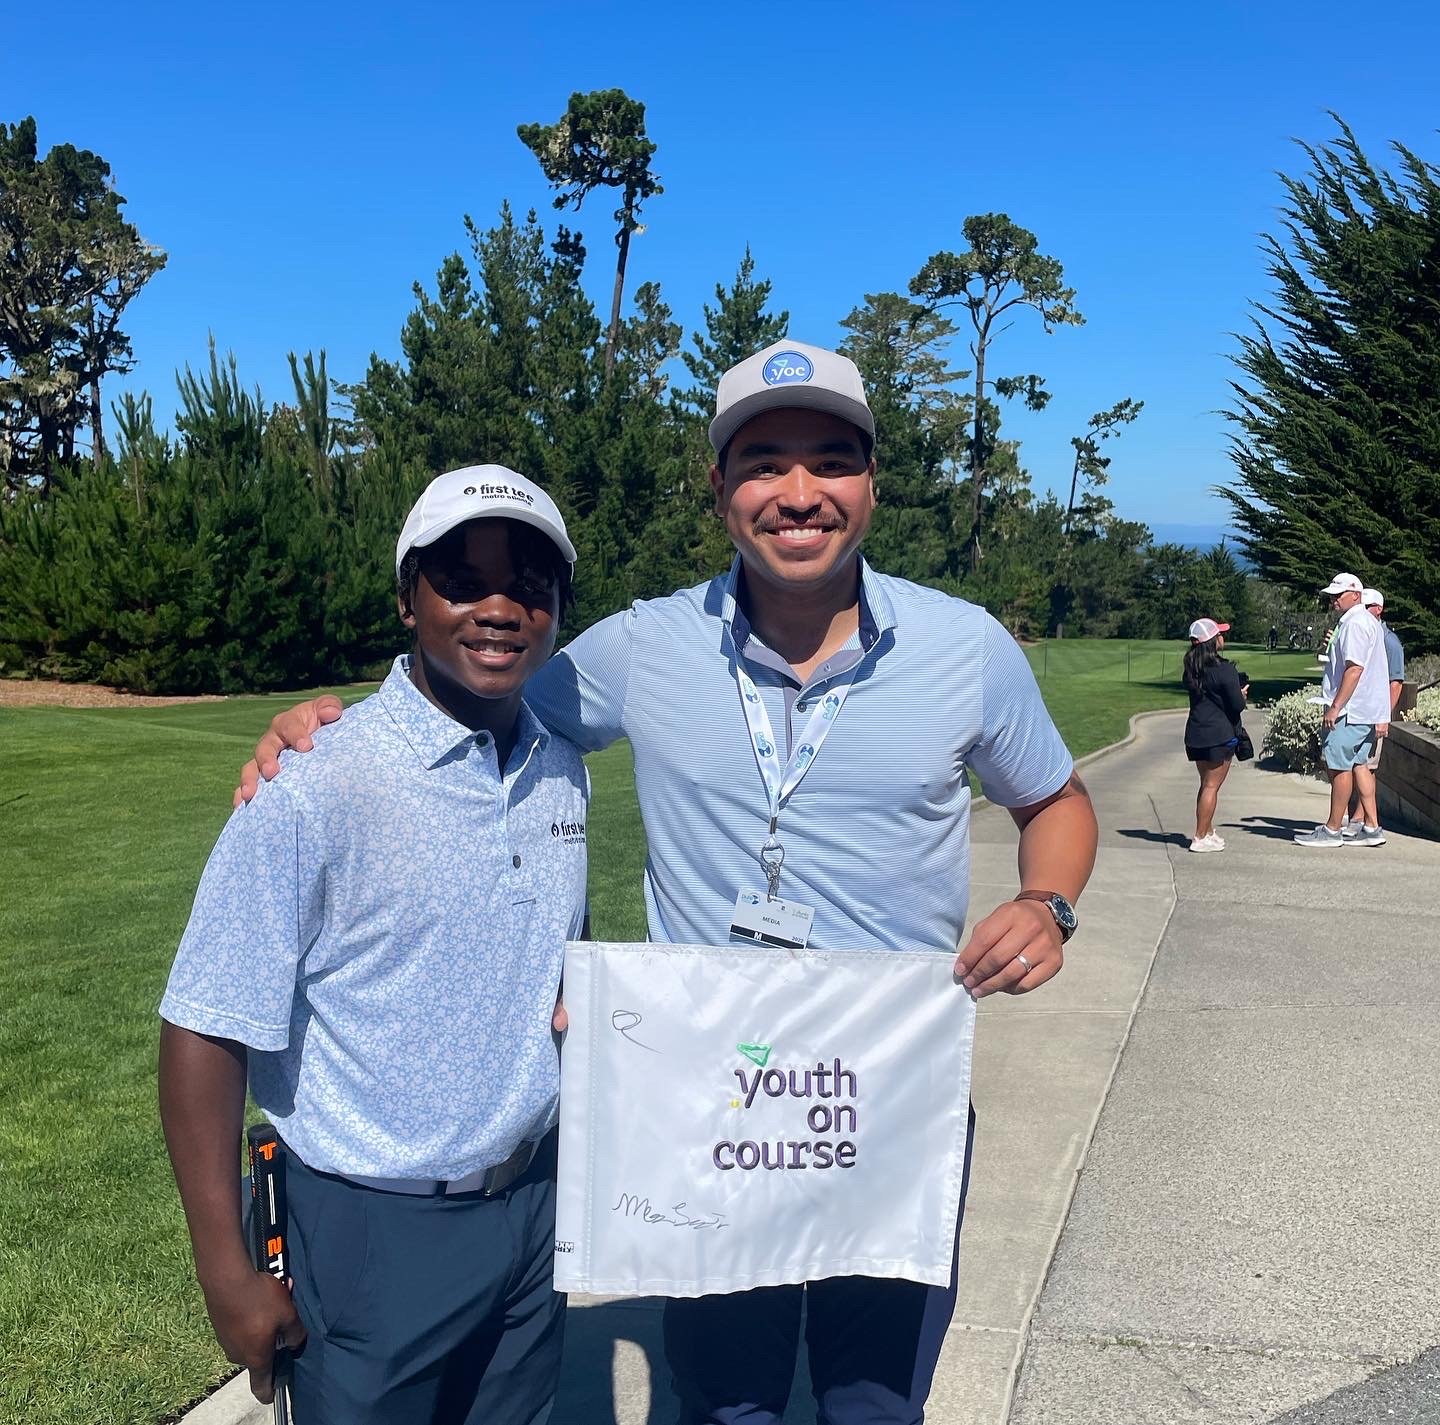 Youth on Course members at the PURE Insurance Championship in Pebble Beach